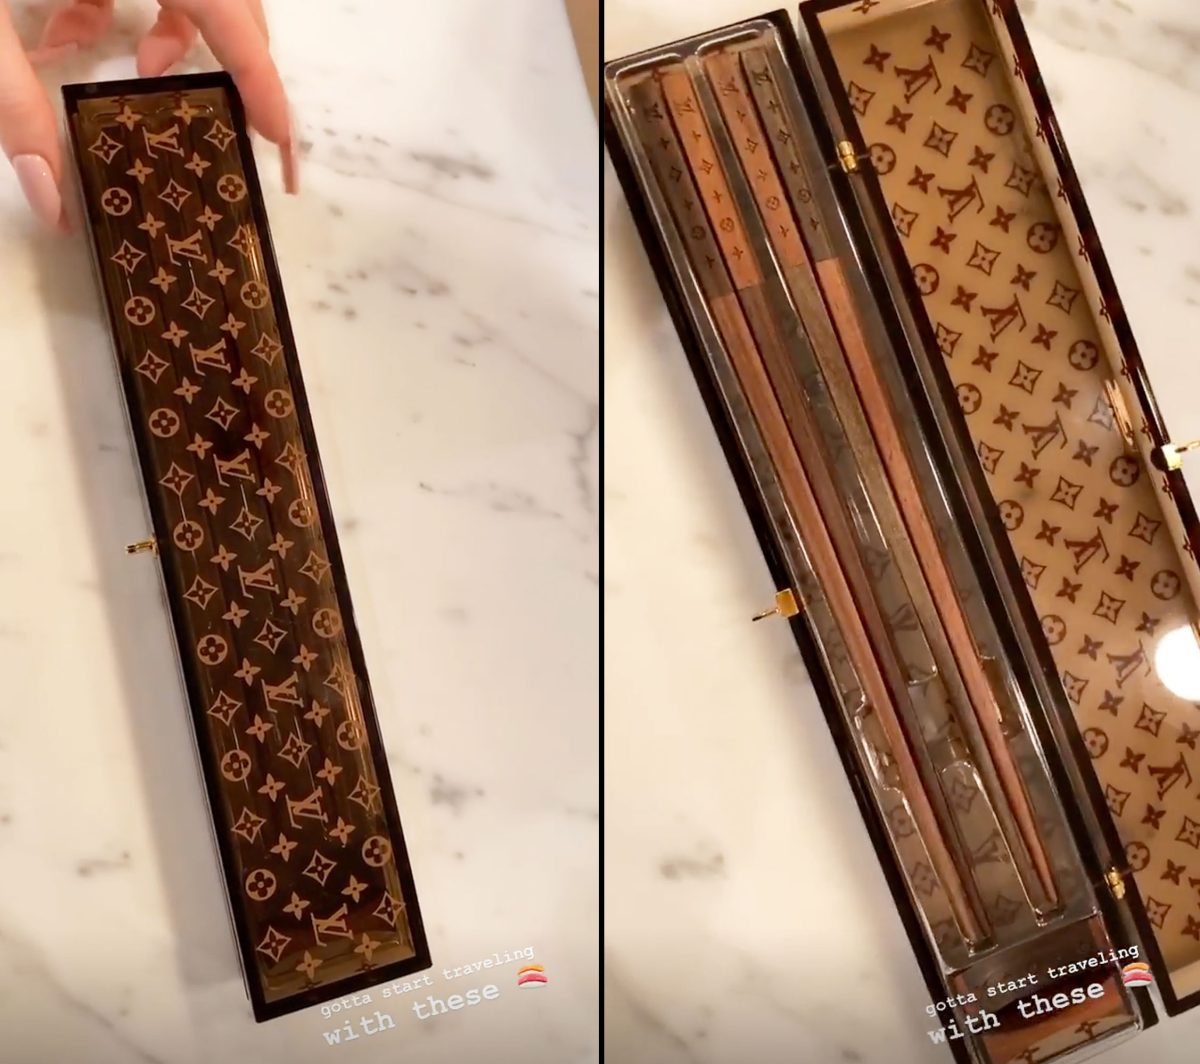 How much are the Louis Vuitton chopsticks worth? TikToker goes